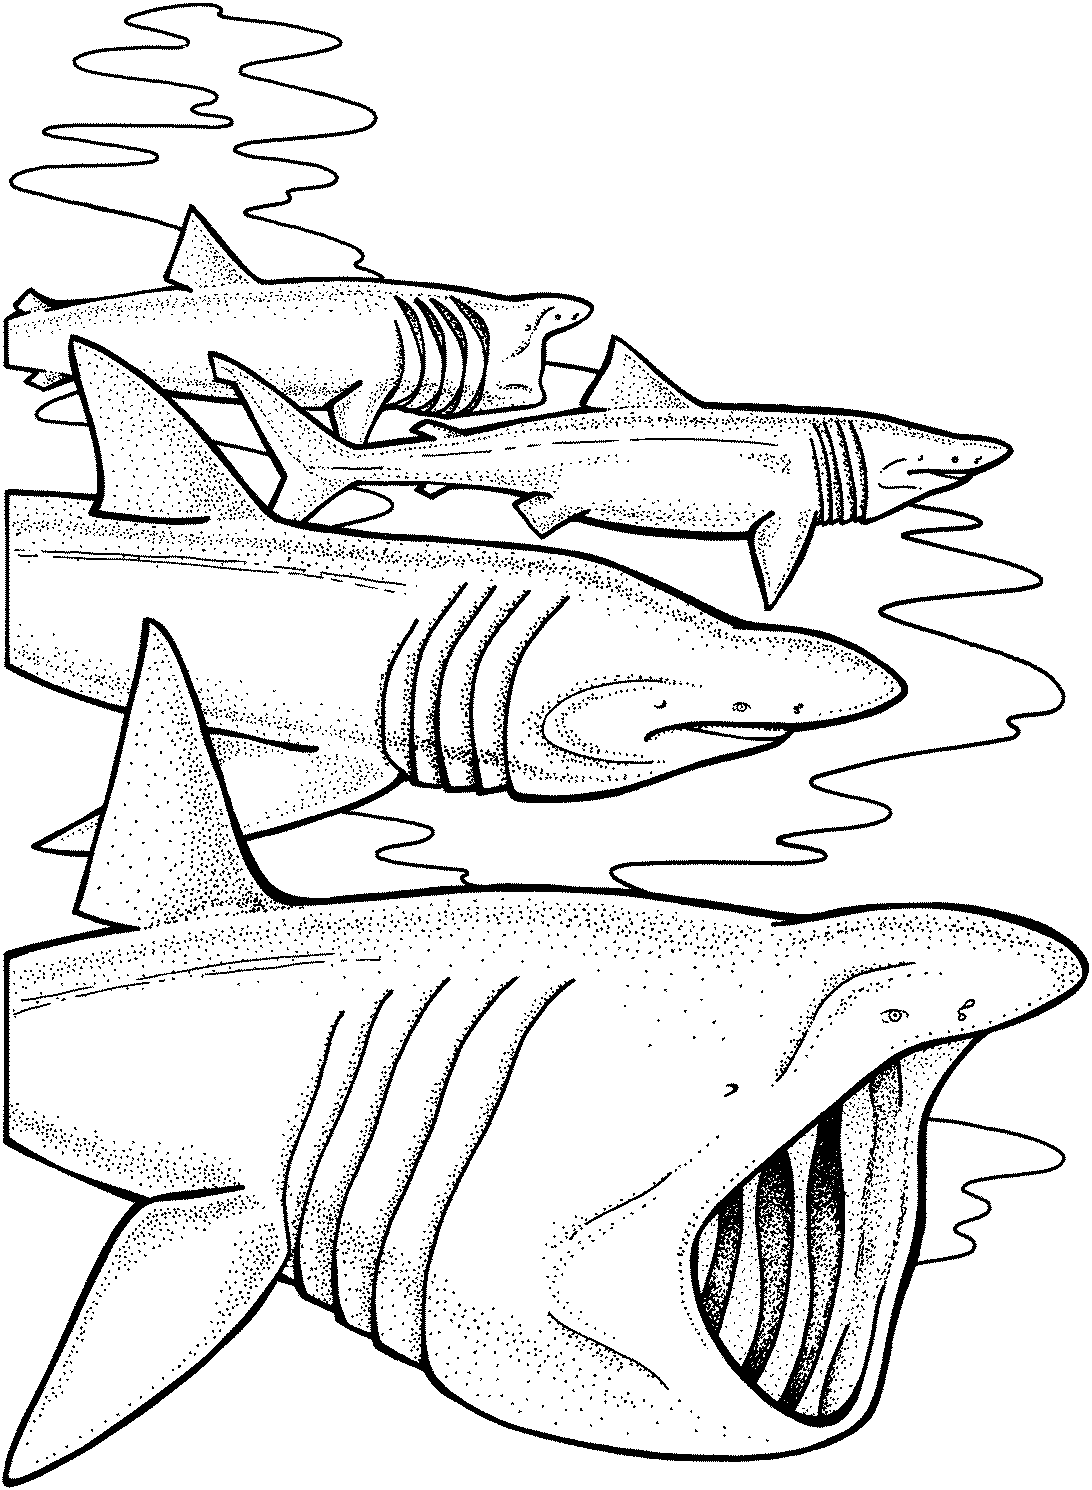 free coloring pages sharks shark line drawing at getdrawingscom free for personal sharks free pages coloring 